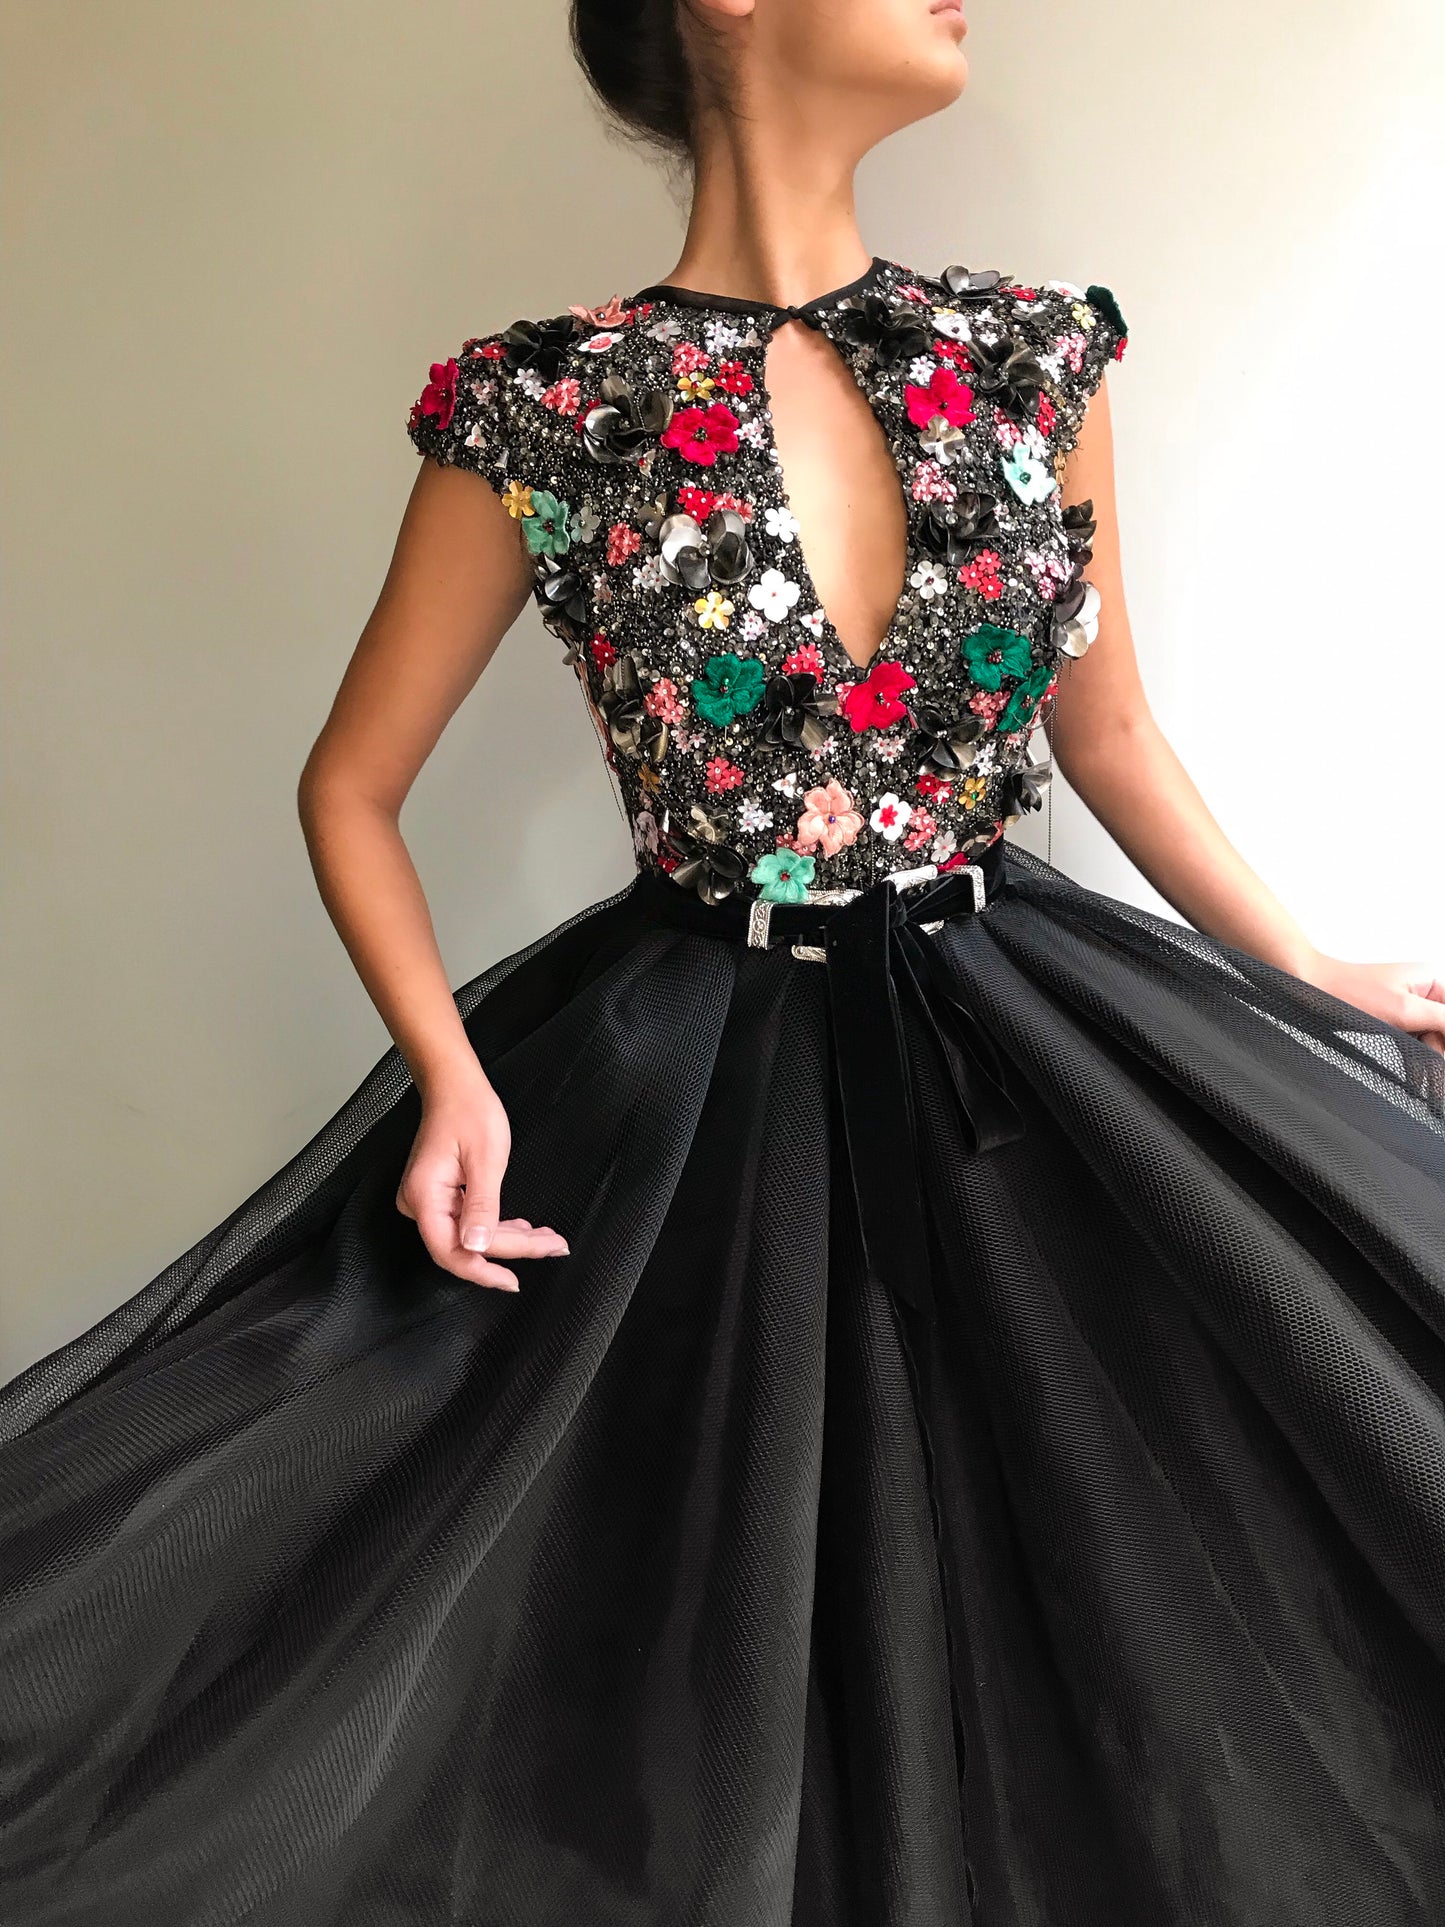 Black A-Line dress with no sleeves and embroidery